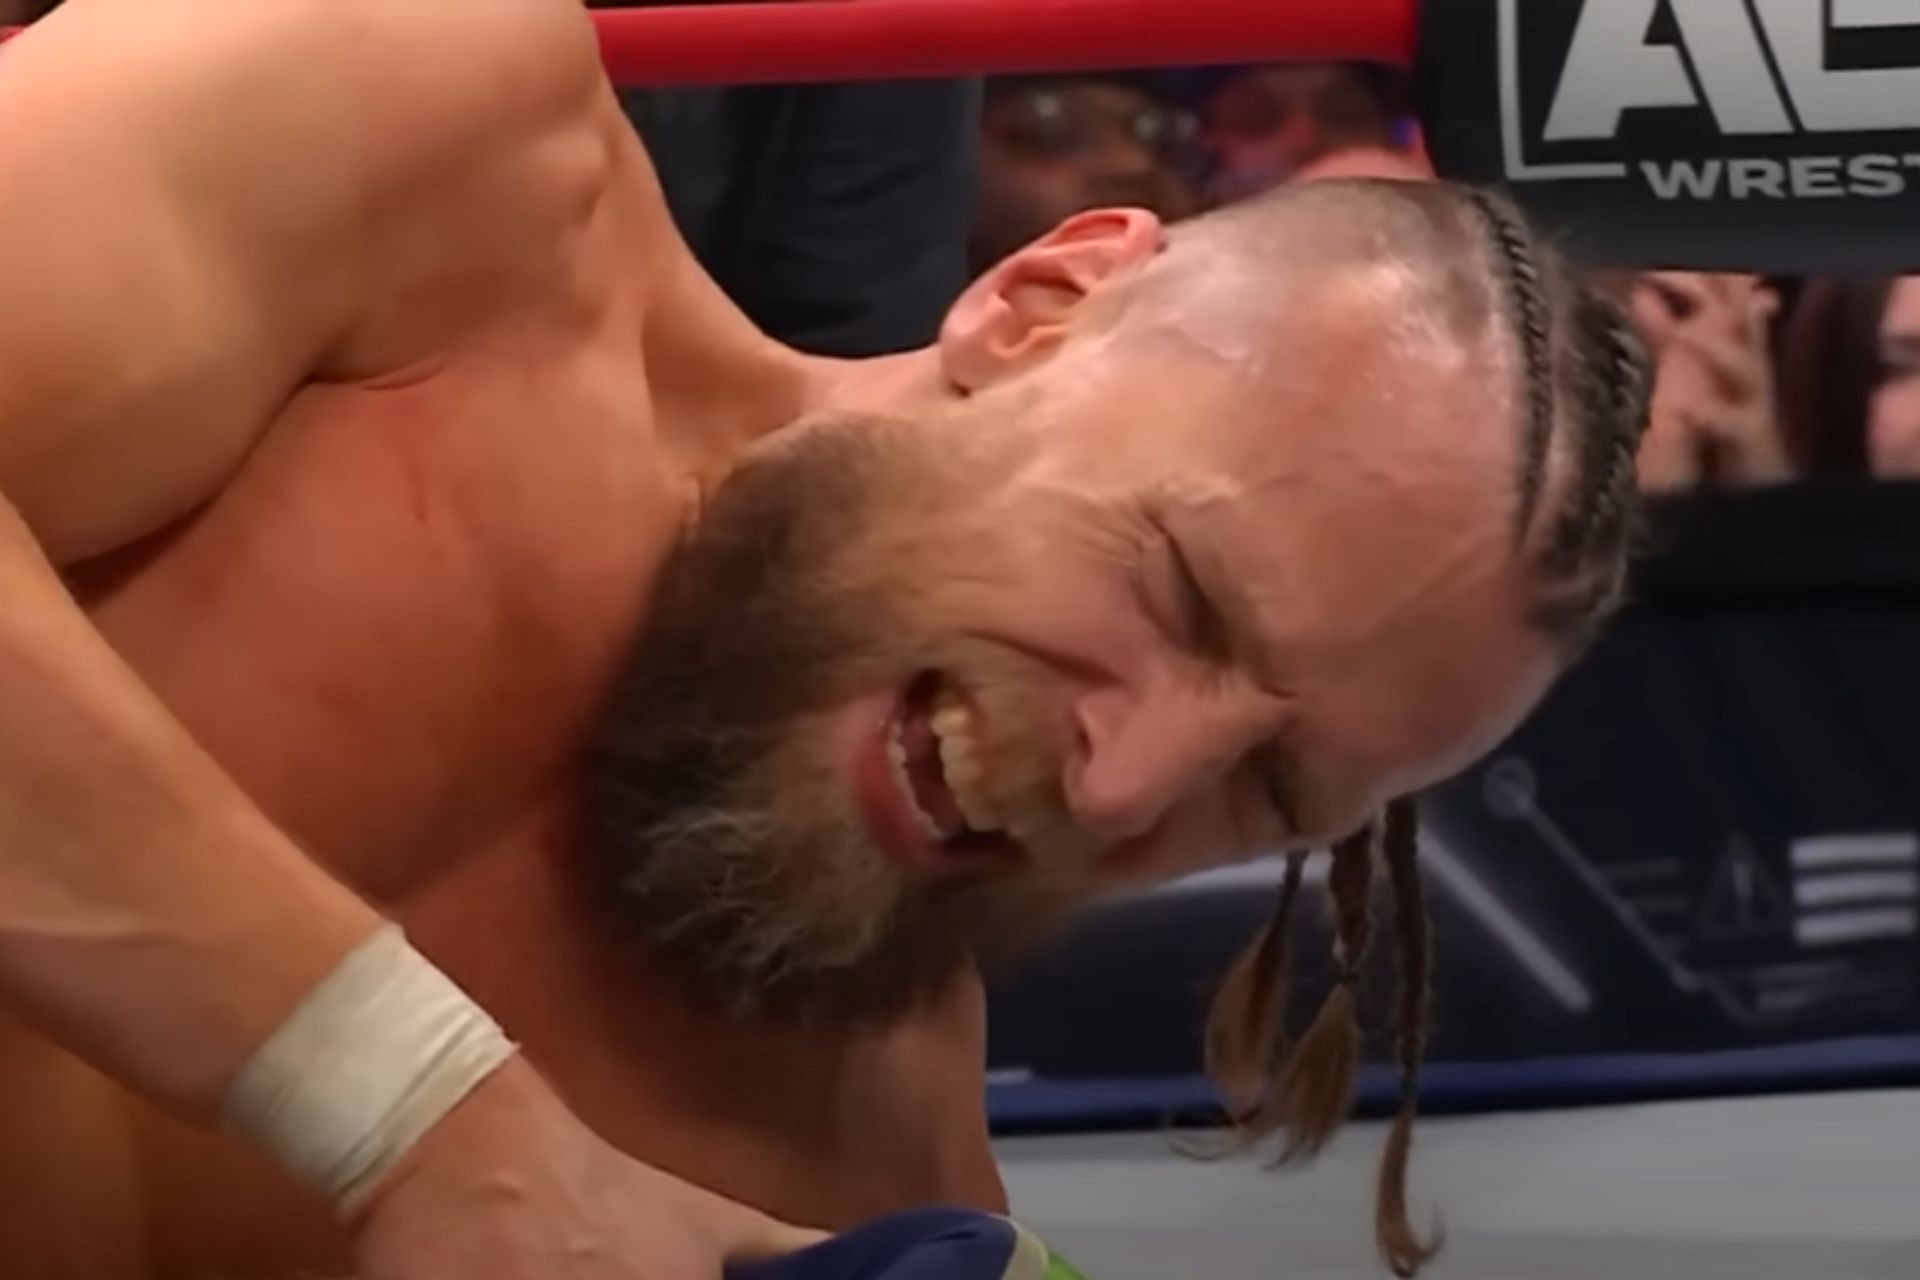 Bryan Danielson has been given a nick-name [Image Source: AEW Youtube]